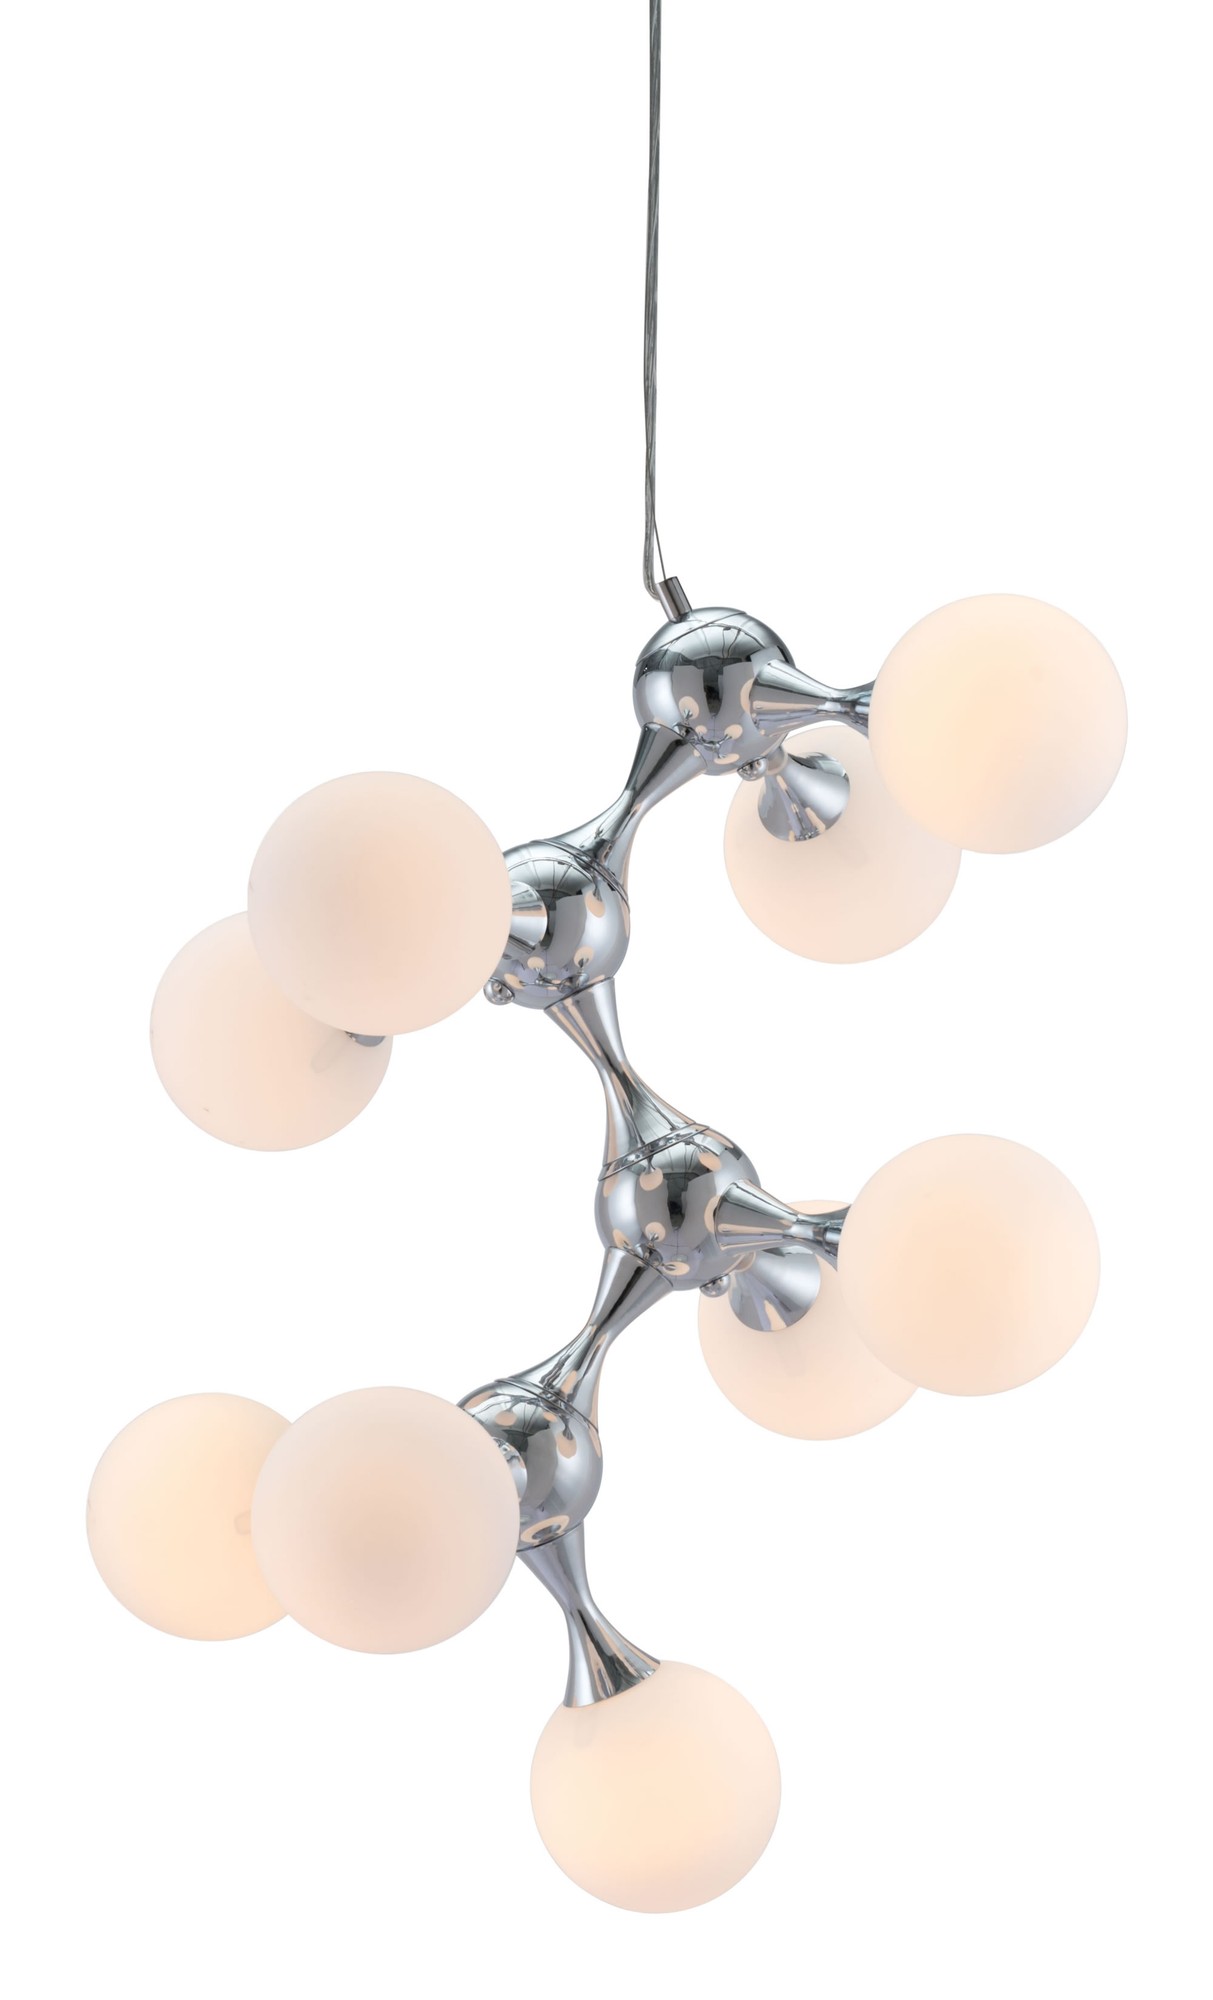 25.6" x 25.6" x 31.5" White & Chrome, Frosted Glass, Metal, Ceiling Lamp